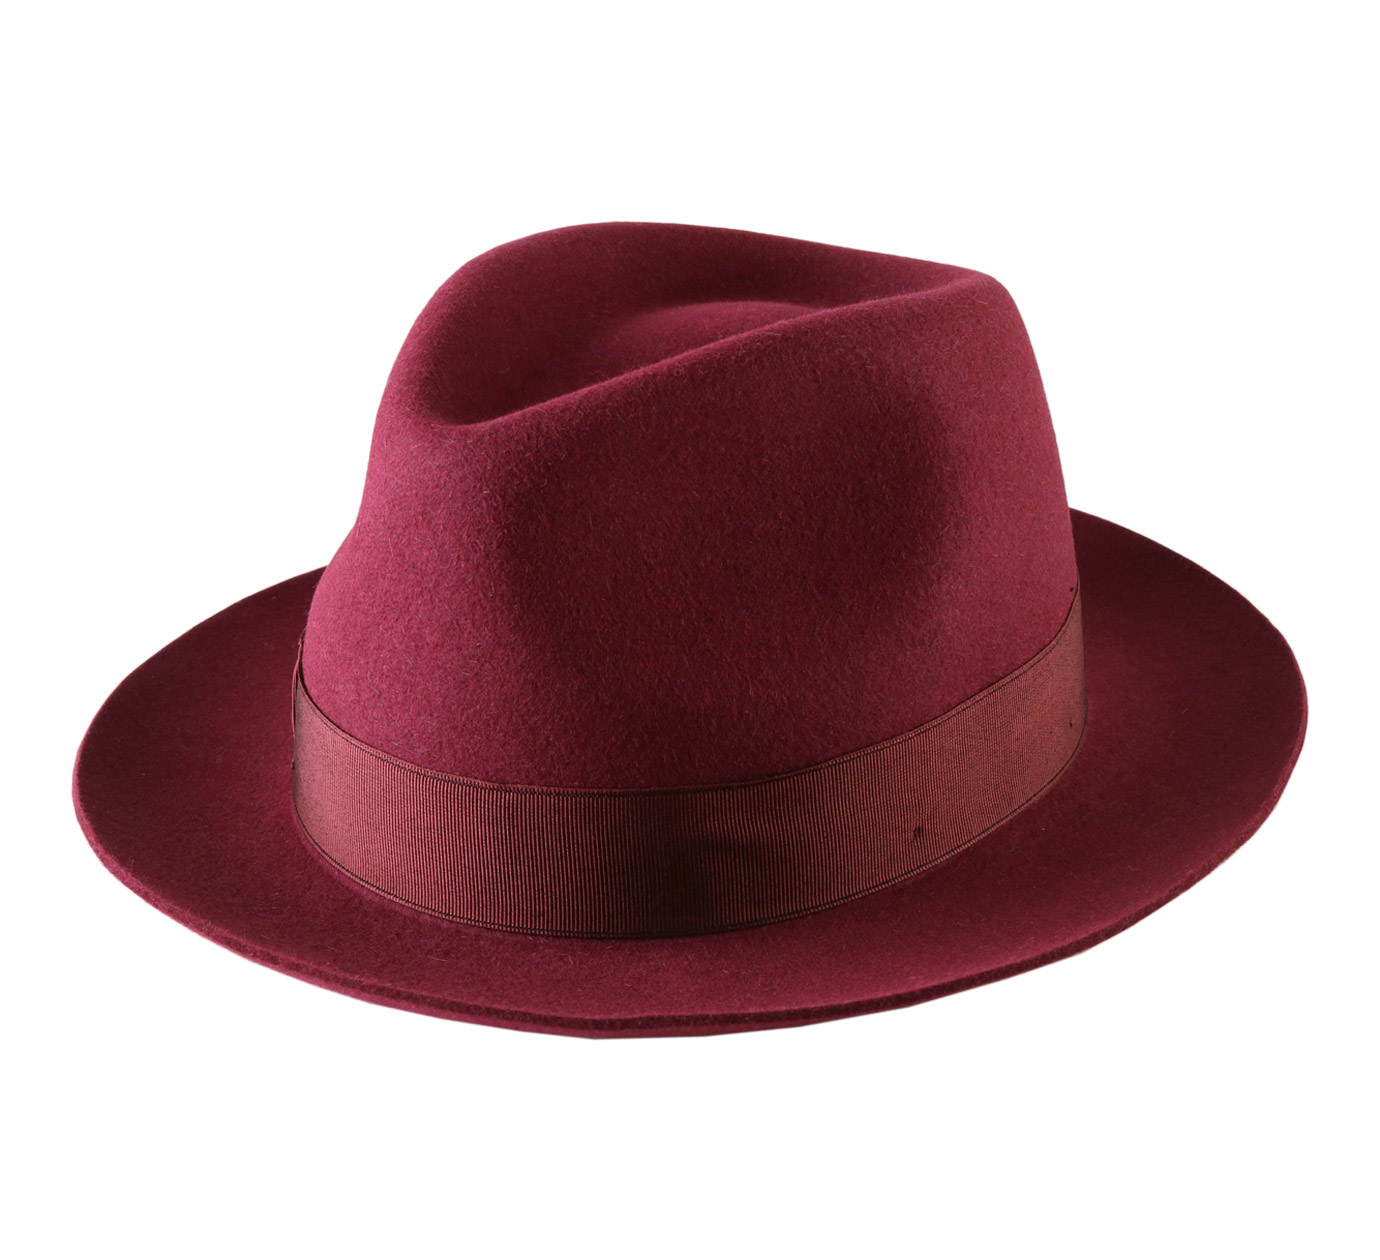 High Quality Hand Made MAROON Pork Pie Felt Trilby Hat 100% Wool Satin Lined 